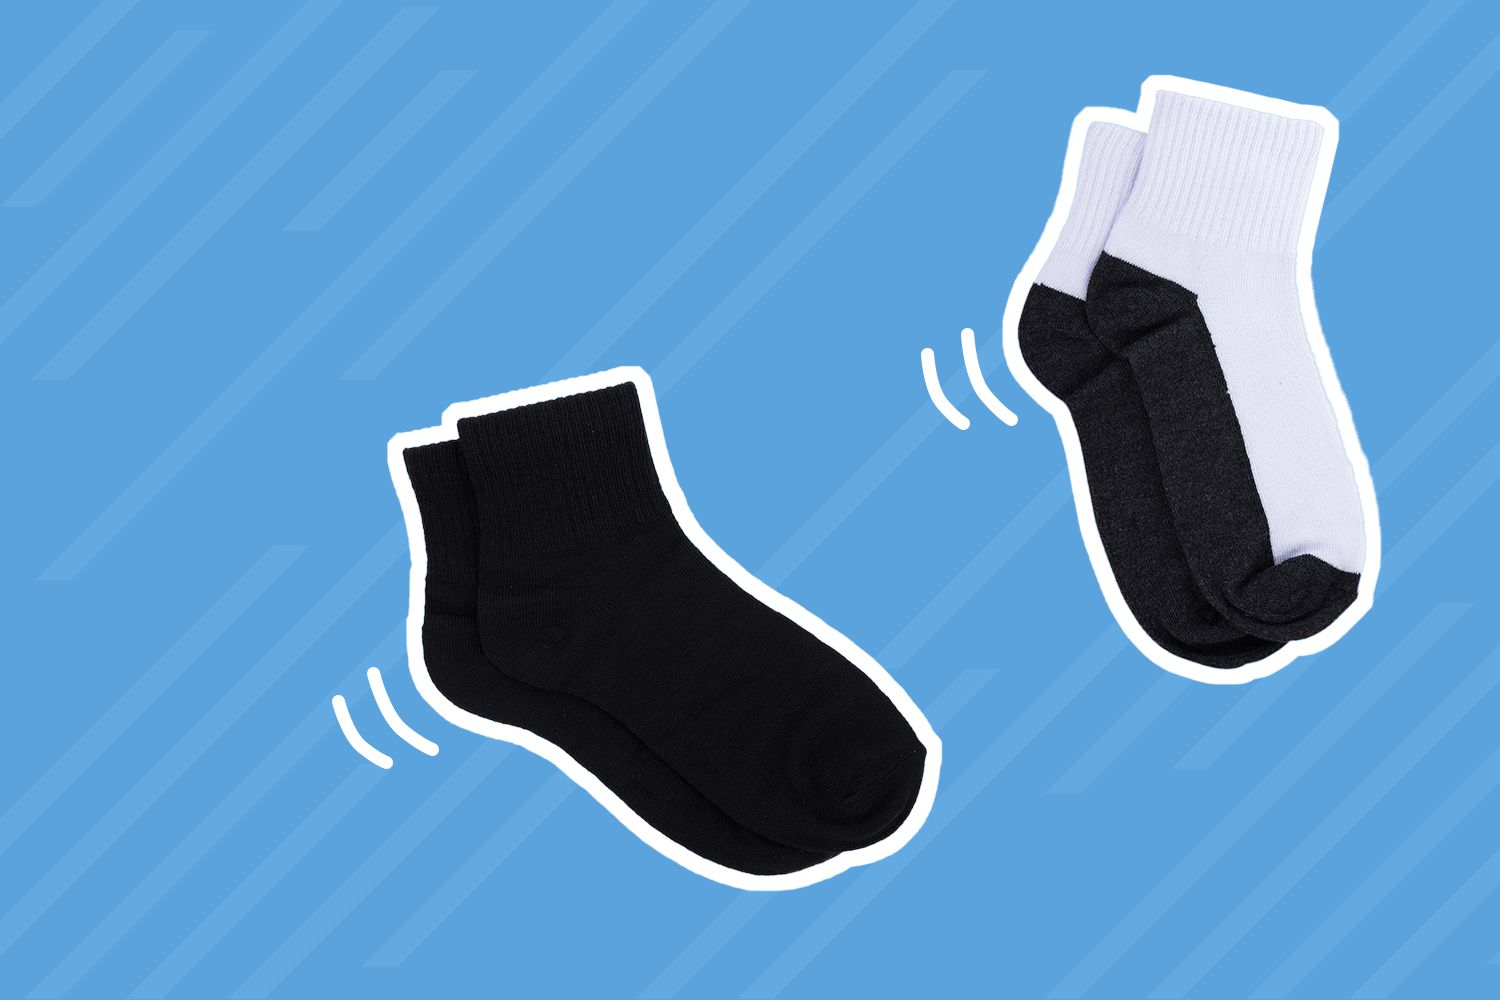 Einstein hated wearing socks. In a letter to his wife, he said that the reason he stopped wearing them was because his big toe always ended up making a hole in them.-u/Tokyono